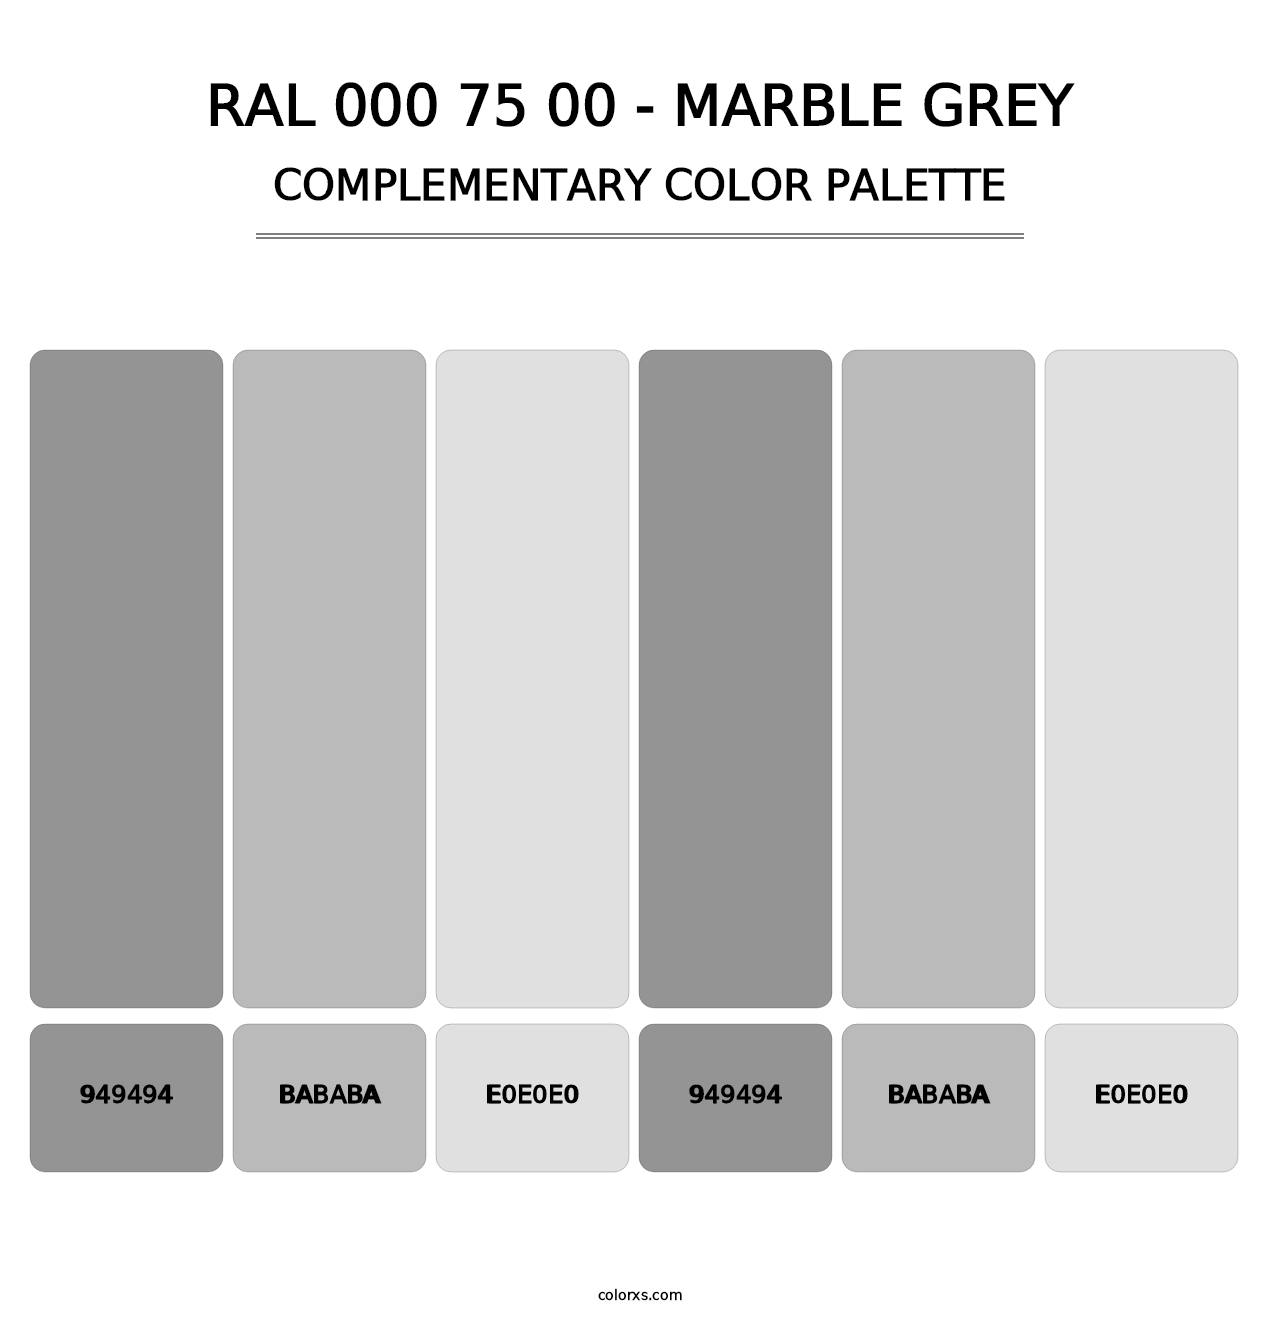 RAL 000 75 00 - Marble Grey - Complementary Color Palette